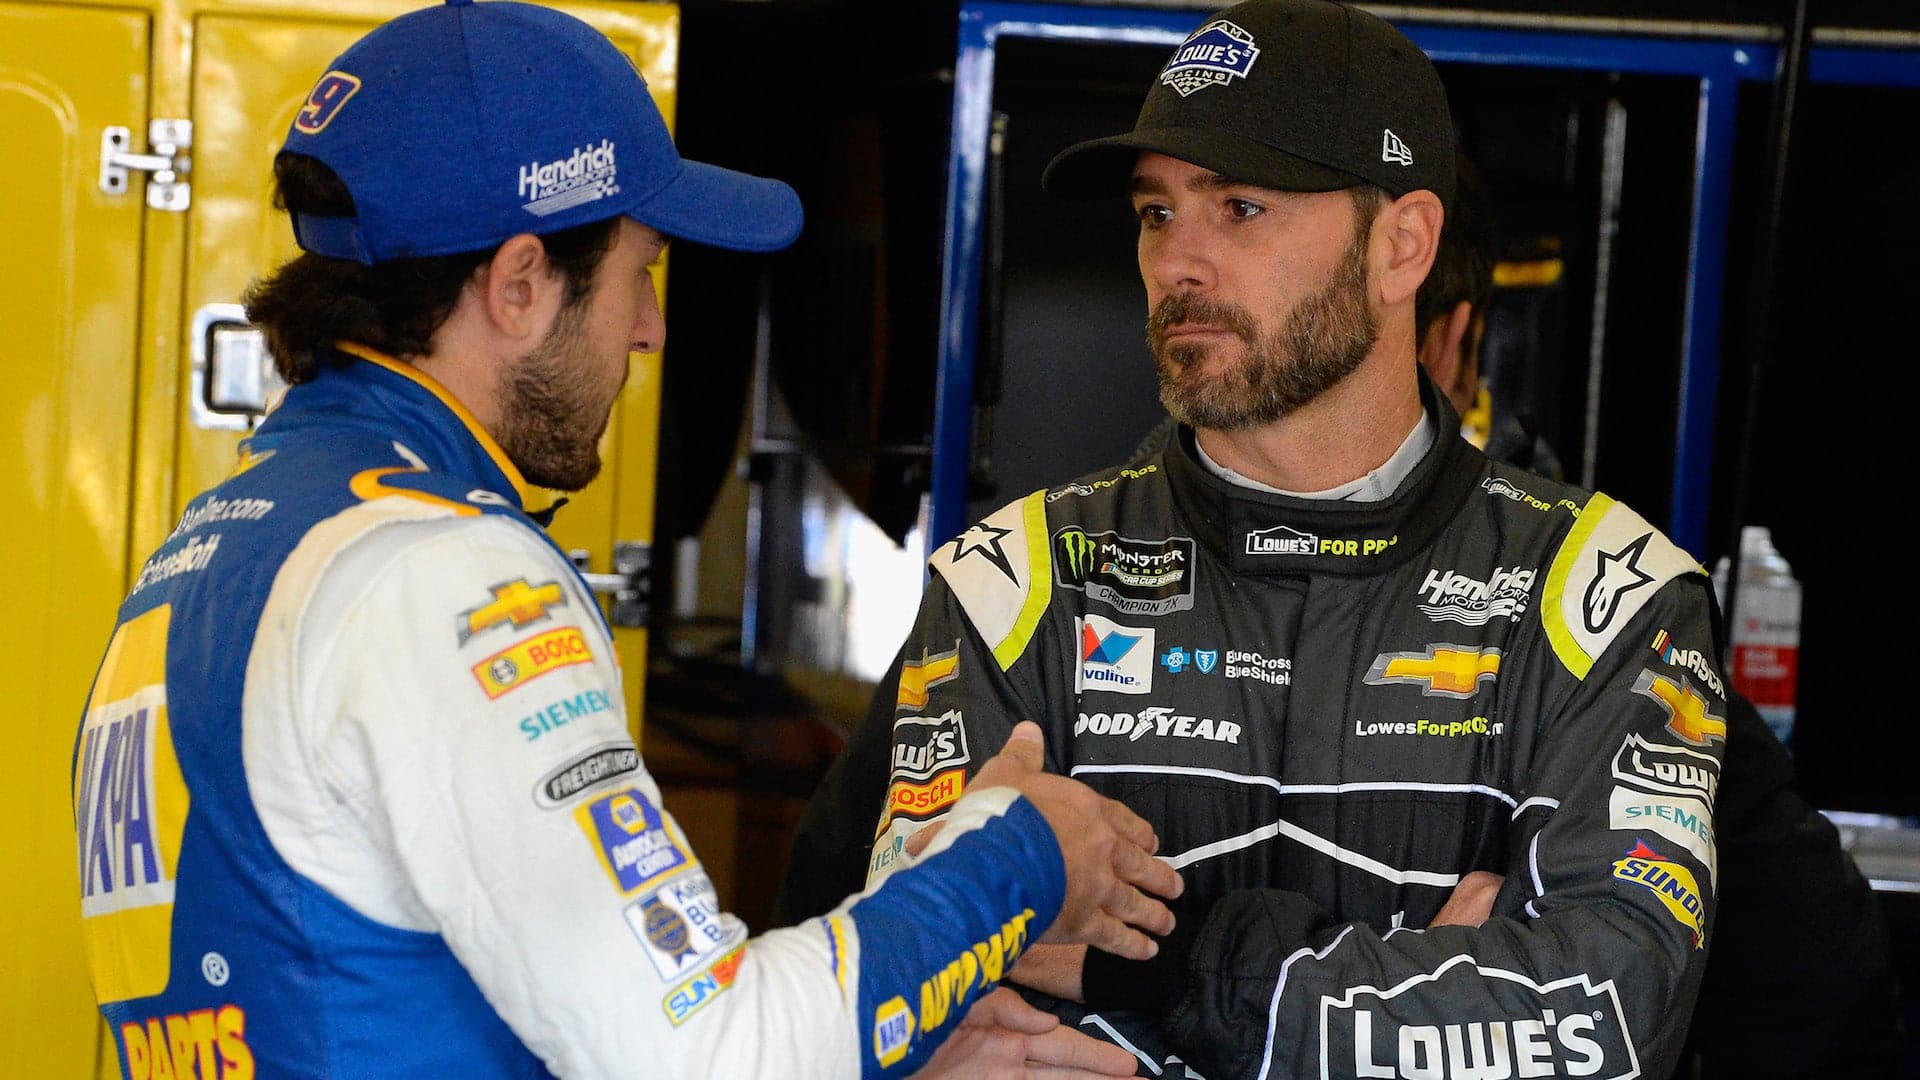 Chase Elliott’s Crew Chief Suspended for Two NASCAR Races